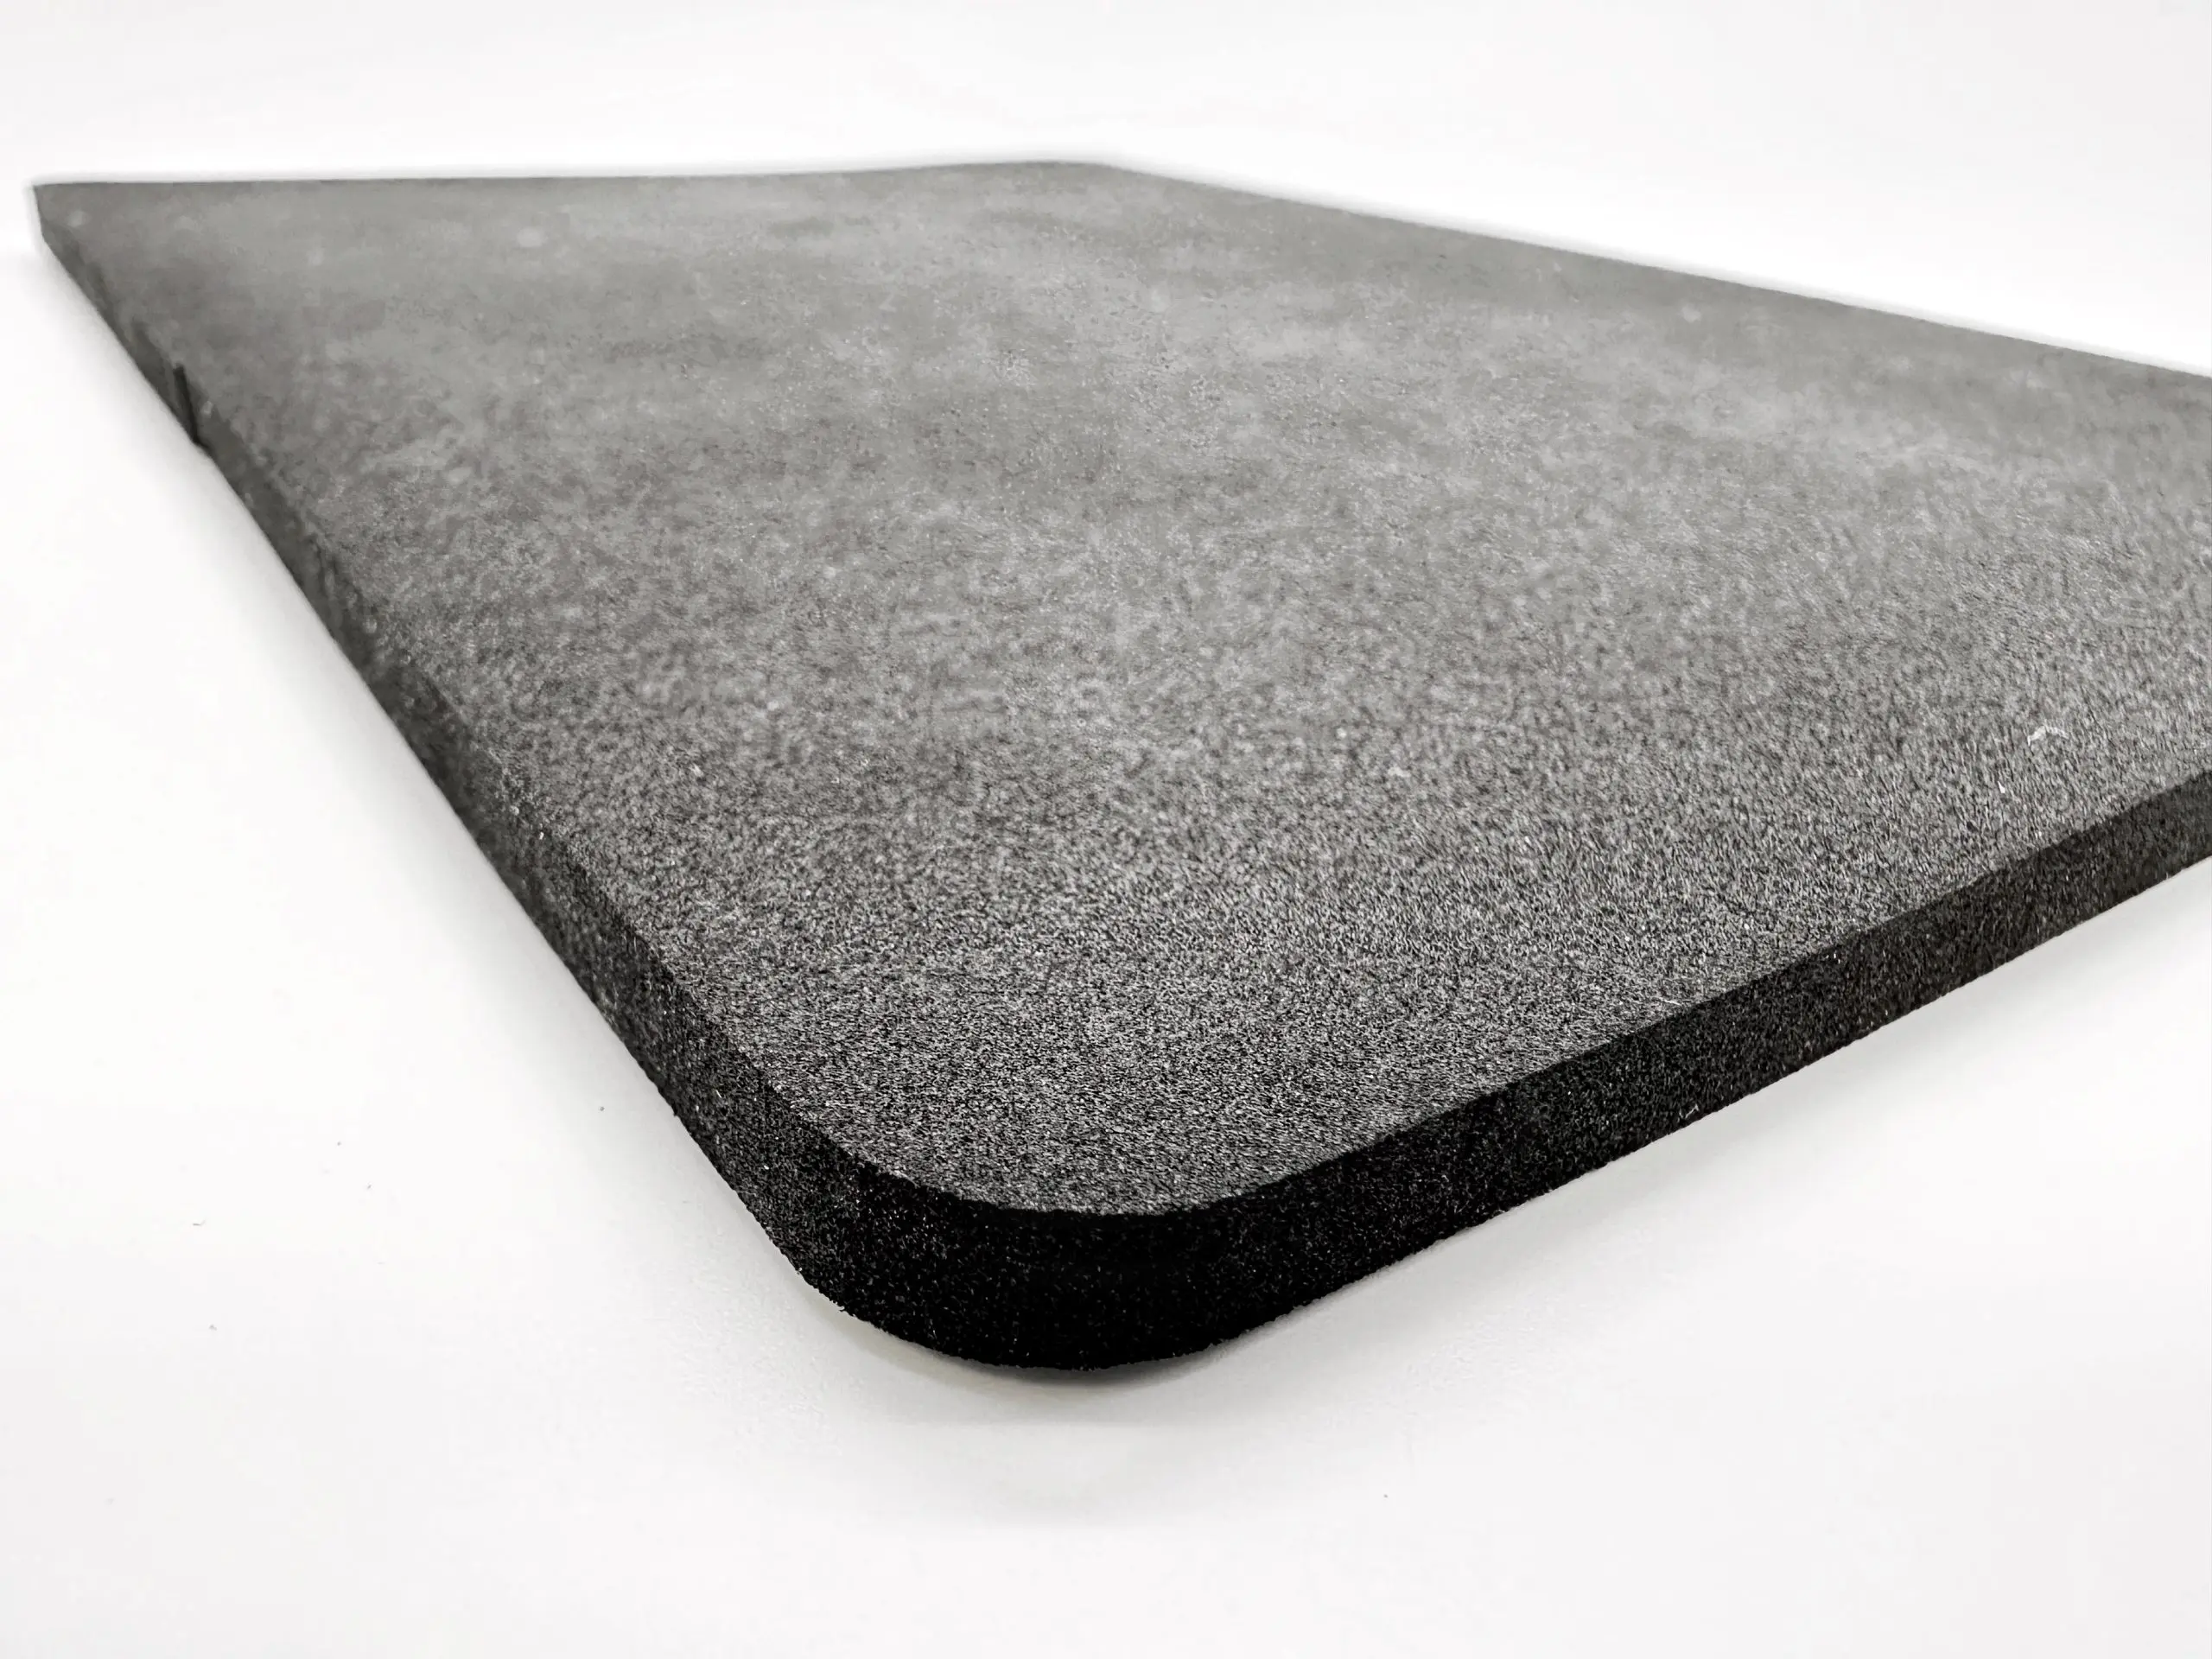 EPDM rubber foams are highly adaptable, facilitating a broad spectrum of applications.